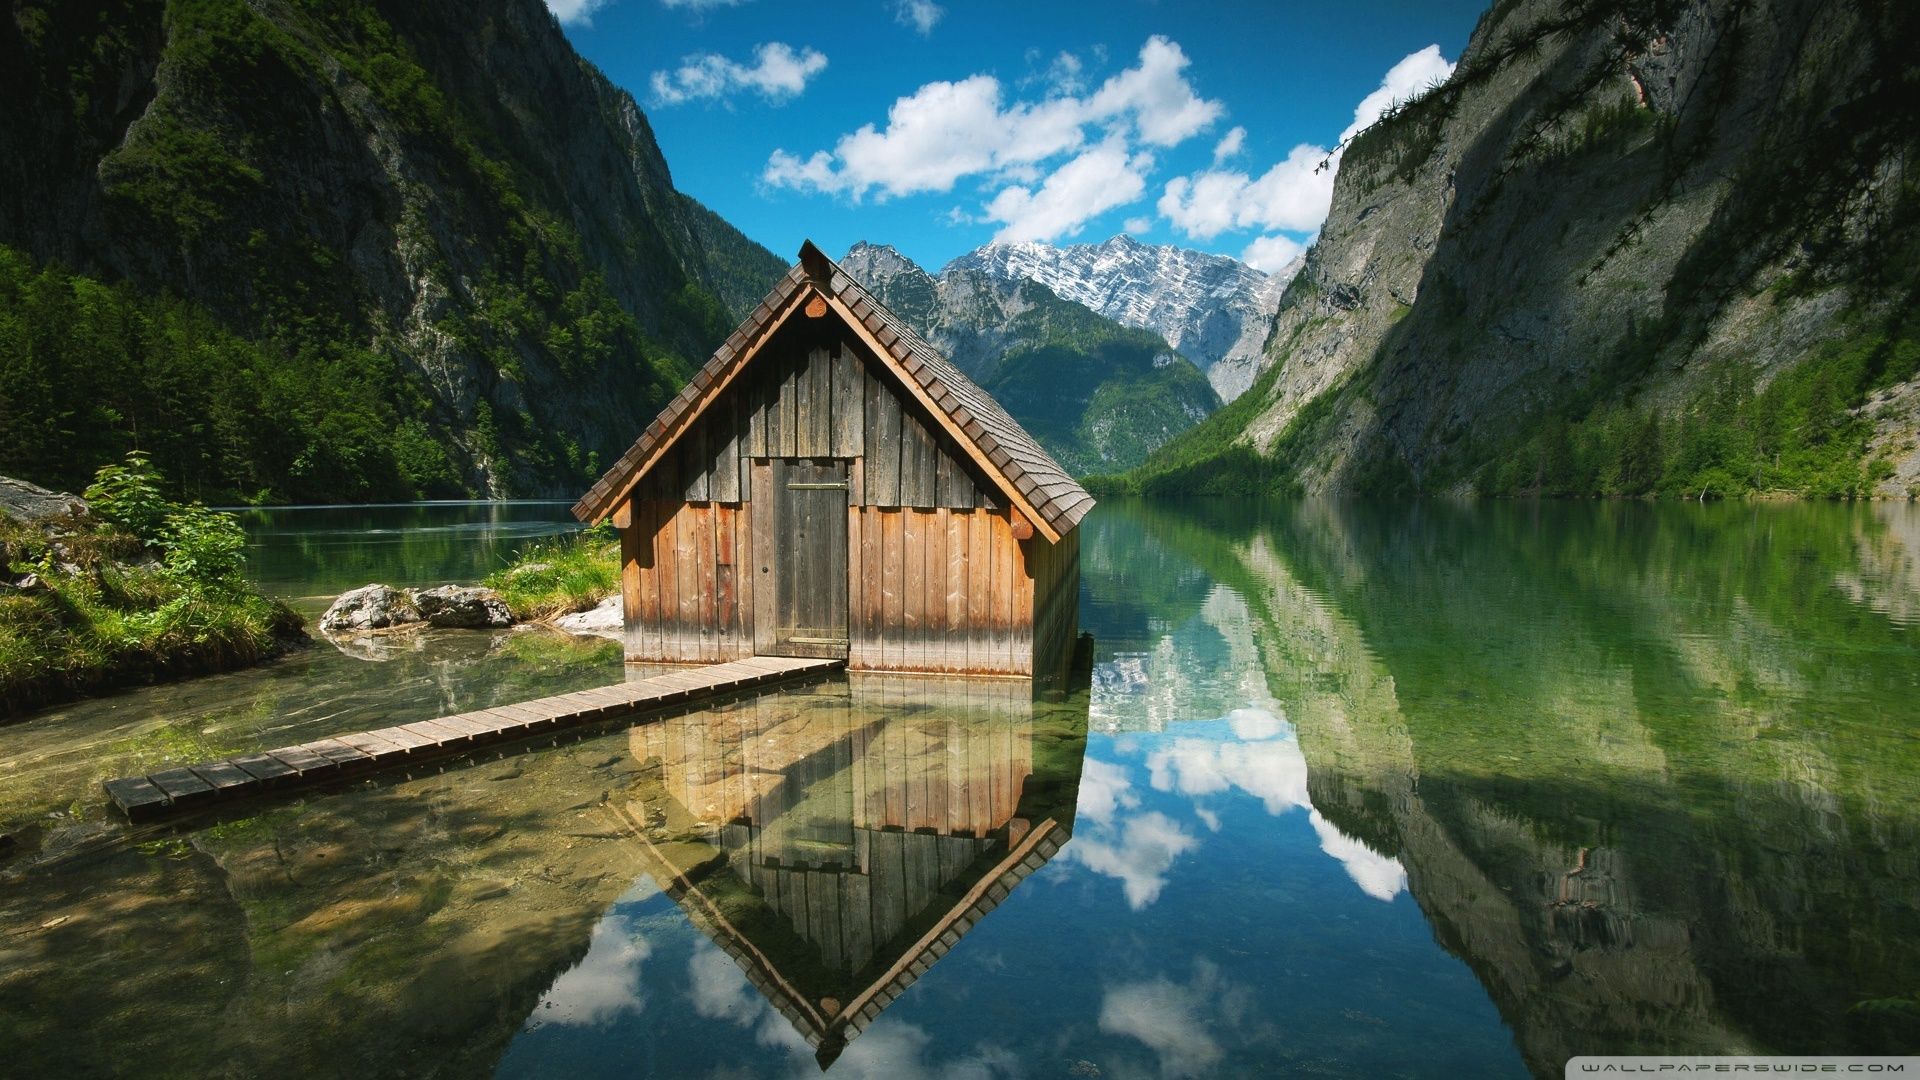 Lake with house